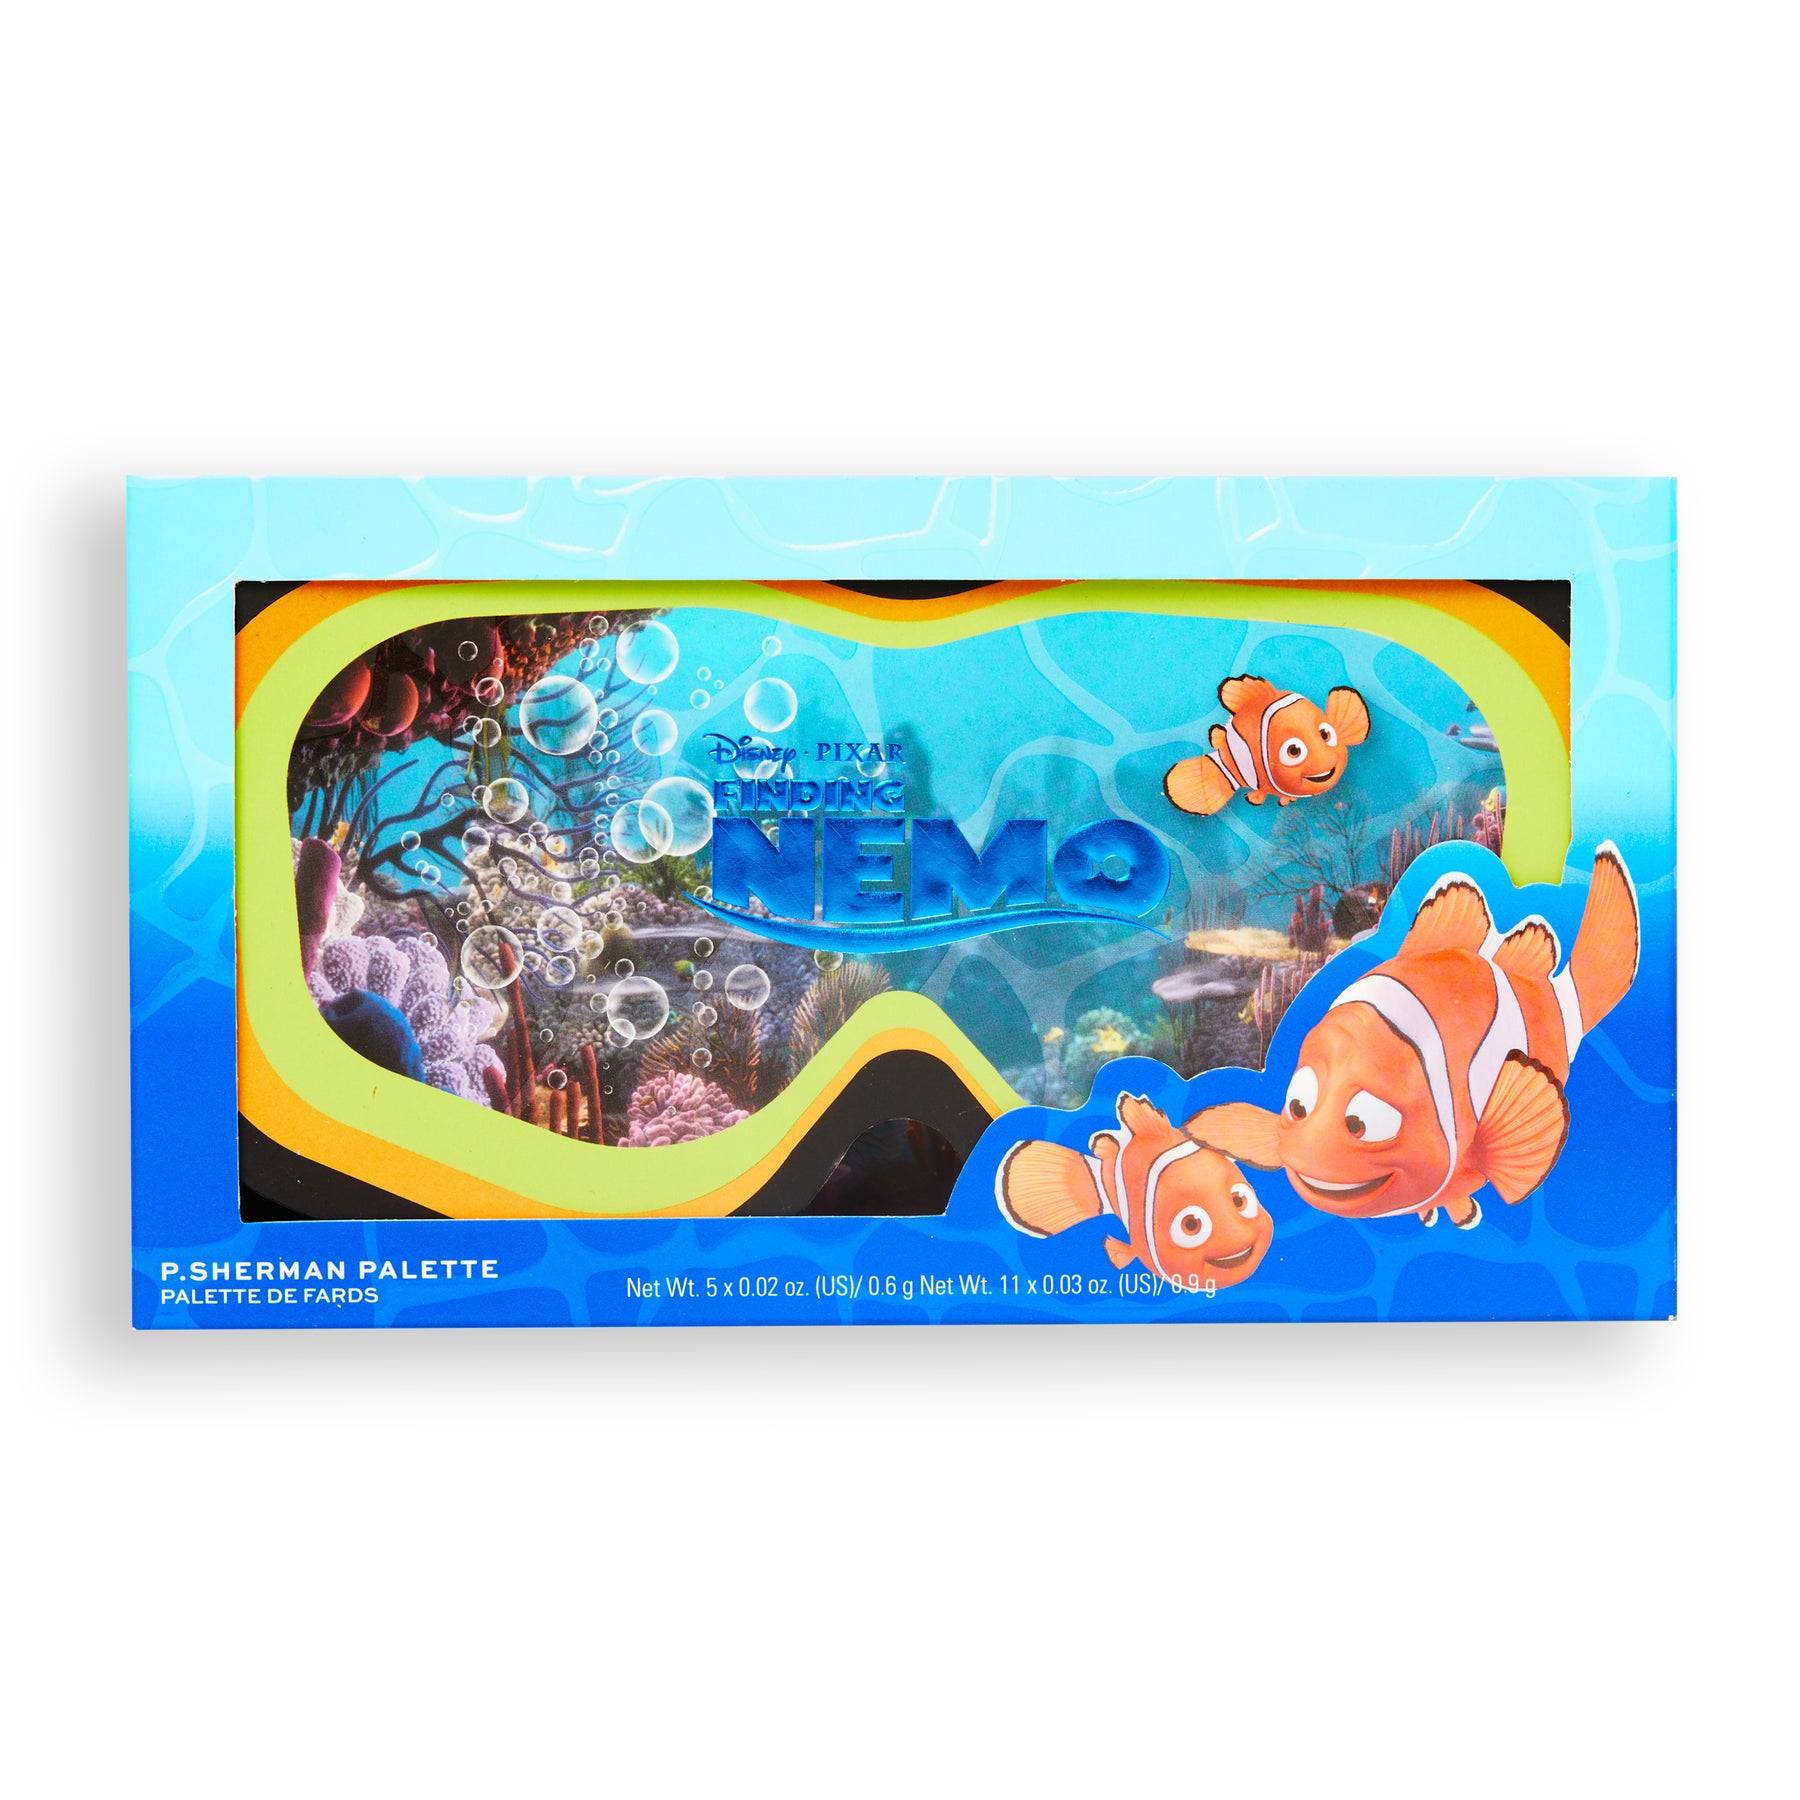 Disney & Pixar’s Finding Nemo and Revolution P. Sherman Shadow Palette OUTLET